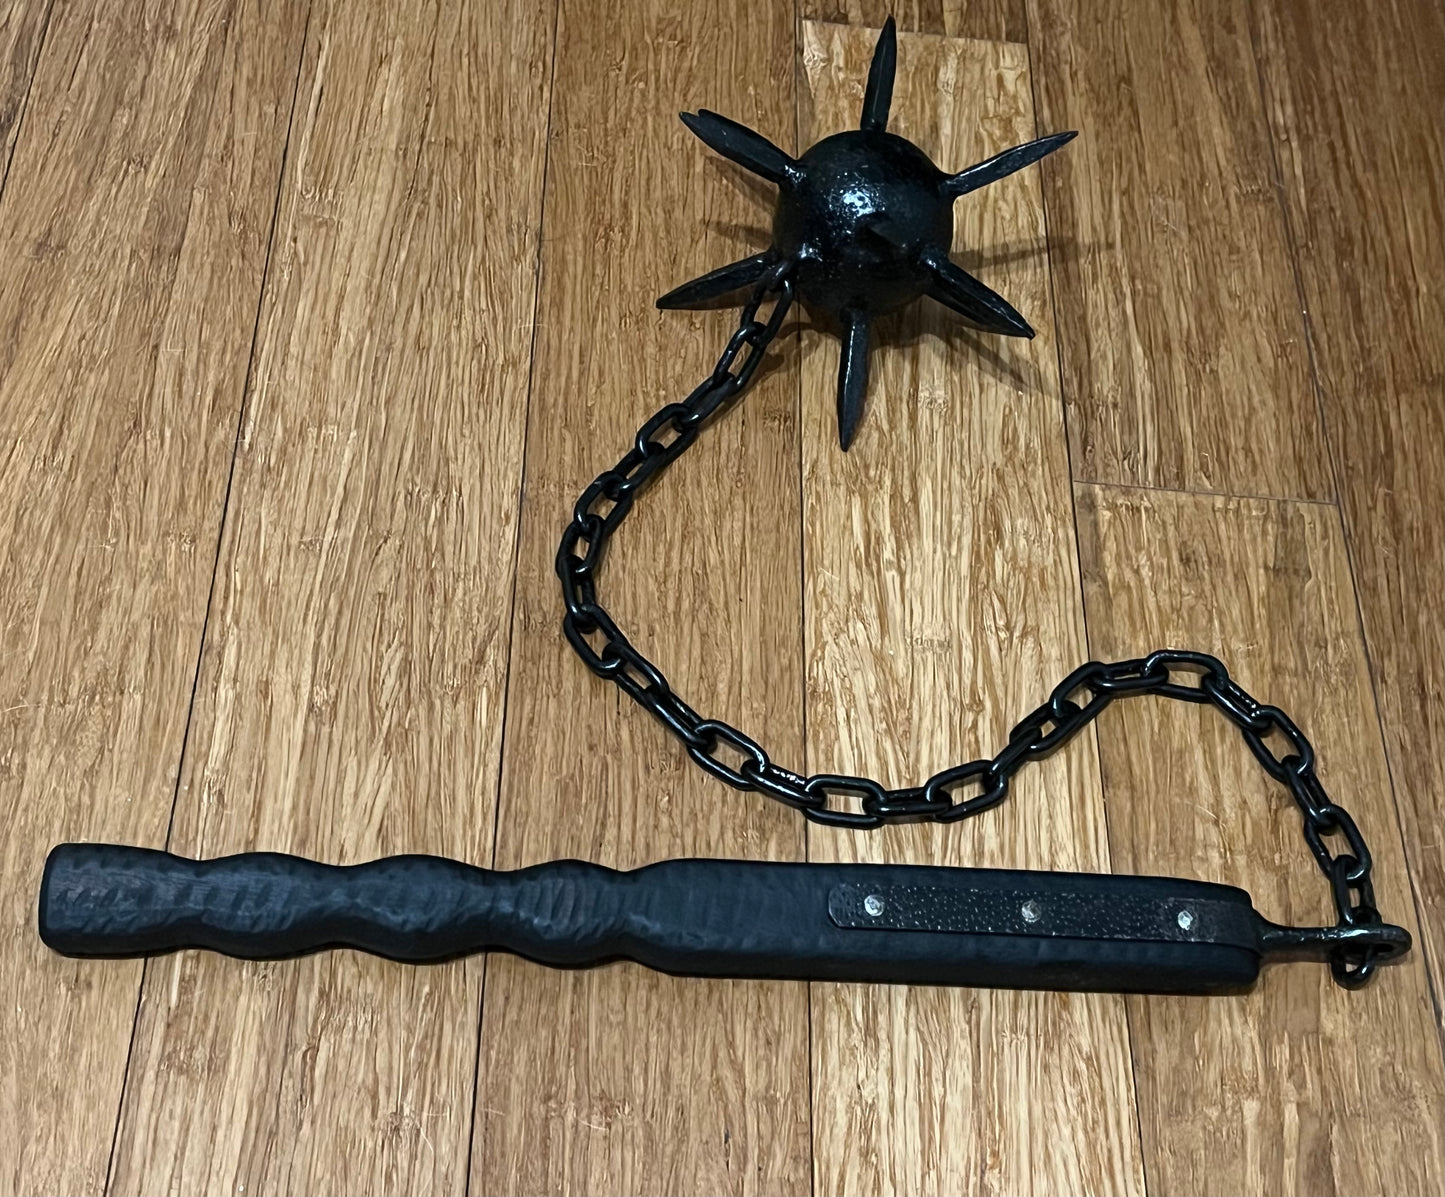 Hand Crafted Medieval Spiked Ball Flail